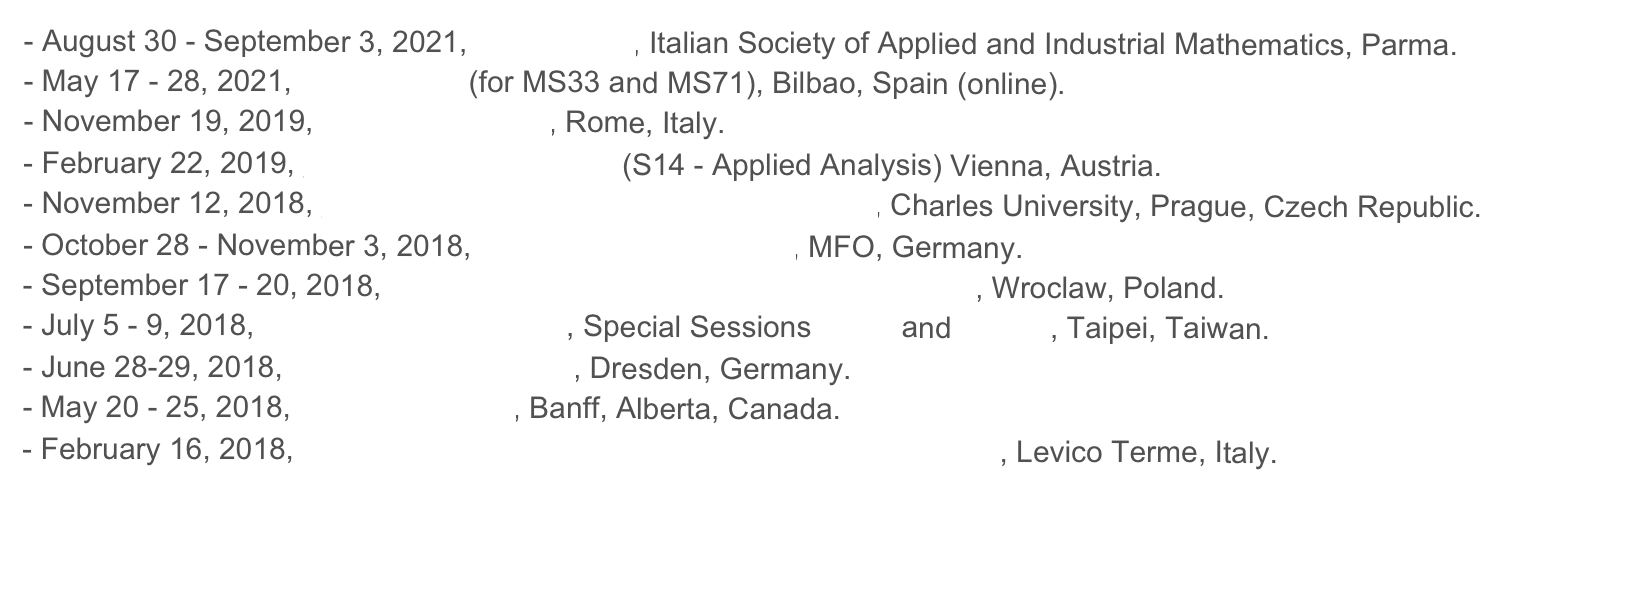 August 30 - September 3, 2021, SIMAI 2020, Italian Society of Applied and Industrial Mathematics, Parma. 
May 17 - 28, 2021, SIAM MS20 (for MS33 and MS71), Bilbao, Spain (online).
November 19, 2019, Workshop RAM3, Rome, Italy. 
February 22, 2019, GAMM Annual Meeting (S14 - Applied Analysis) Vienna, Austria. 
November 12, 2018, Necas Seminar on Continuum Mechanics, Charles University, Prague, Czech Republic.  
October 28 - November 3, 2018, Oberwolfach Workshop, MFO, Germany.September 17 - 20, 2018, joint PTM-SIMAI-UMI Mathematical Meeting, Wroclaw, Poland.July 5 - 9, 2018, 12th AIMS Conference, Special Sessions SS75 and SS144, Taipei, Taiwan.
June 28-29, 2018, Applied Analysis Day, Dresden, Germany.May 20 - 25, 2018, BIRS Workshop, Banff, Alberta, Canada. 
February 16, 2018, 28th Convegno Nazionale di Calcolo delle Variazioni, Levico Terme, Italy. 


